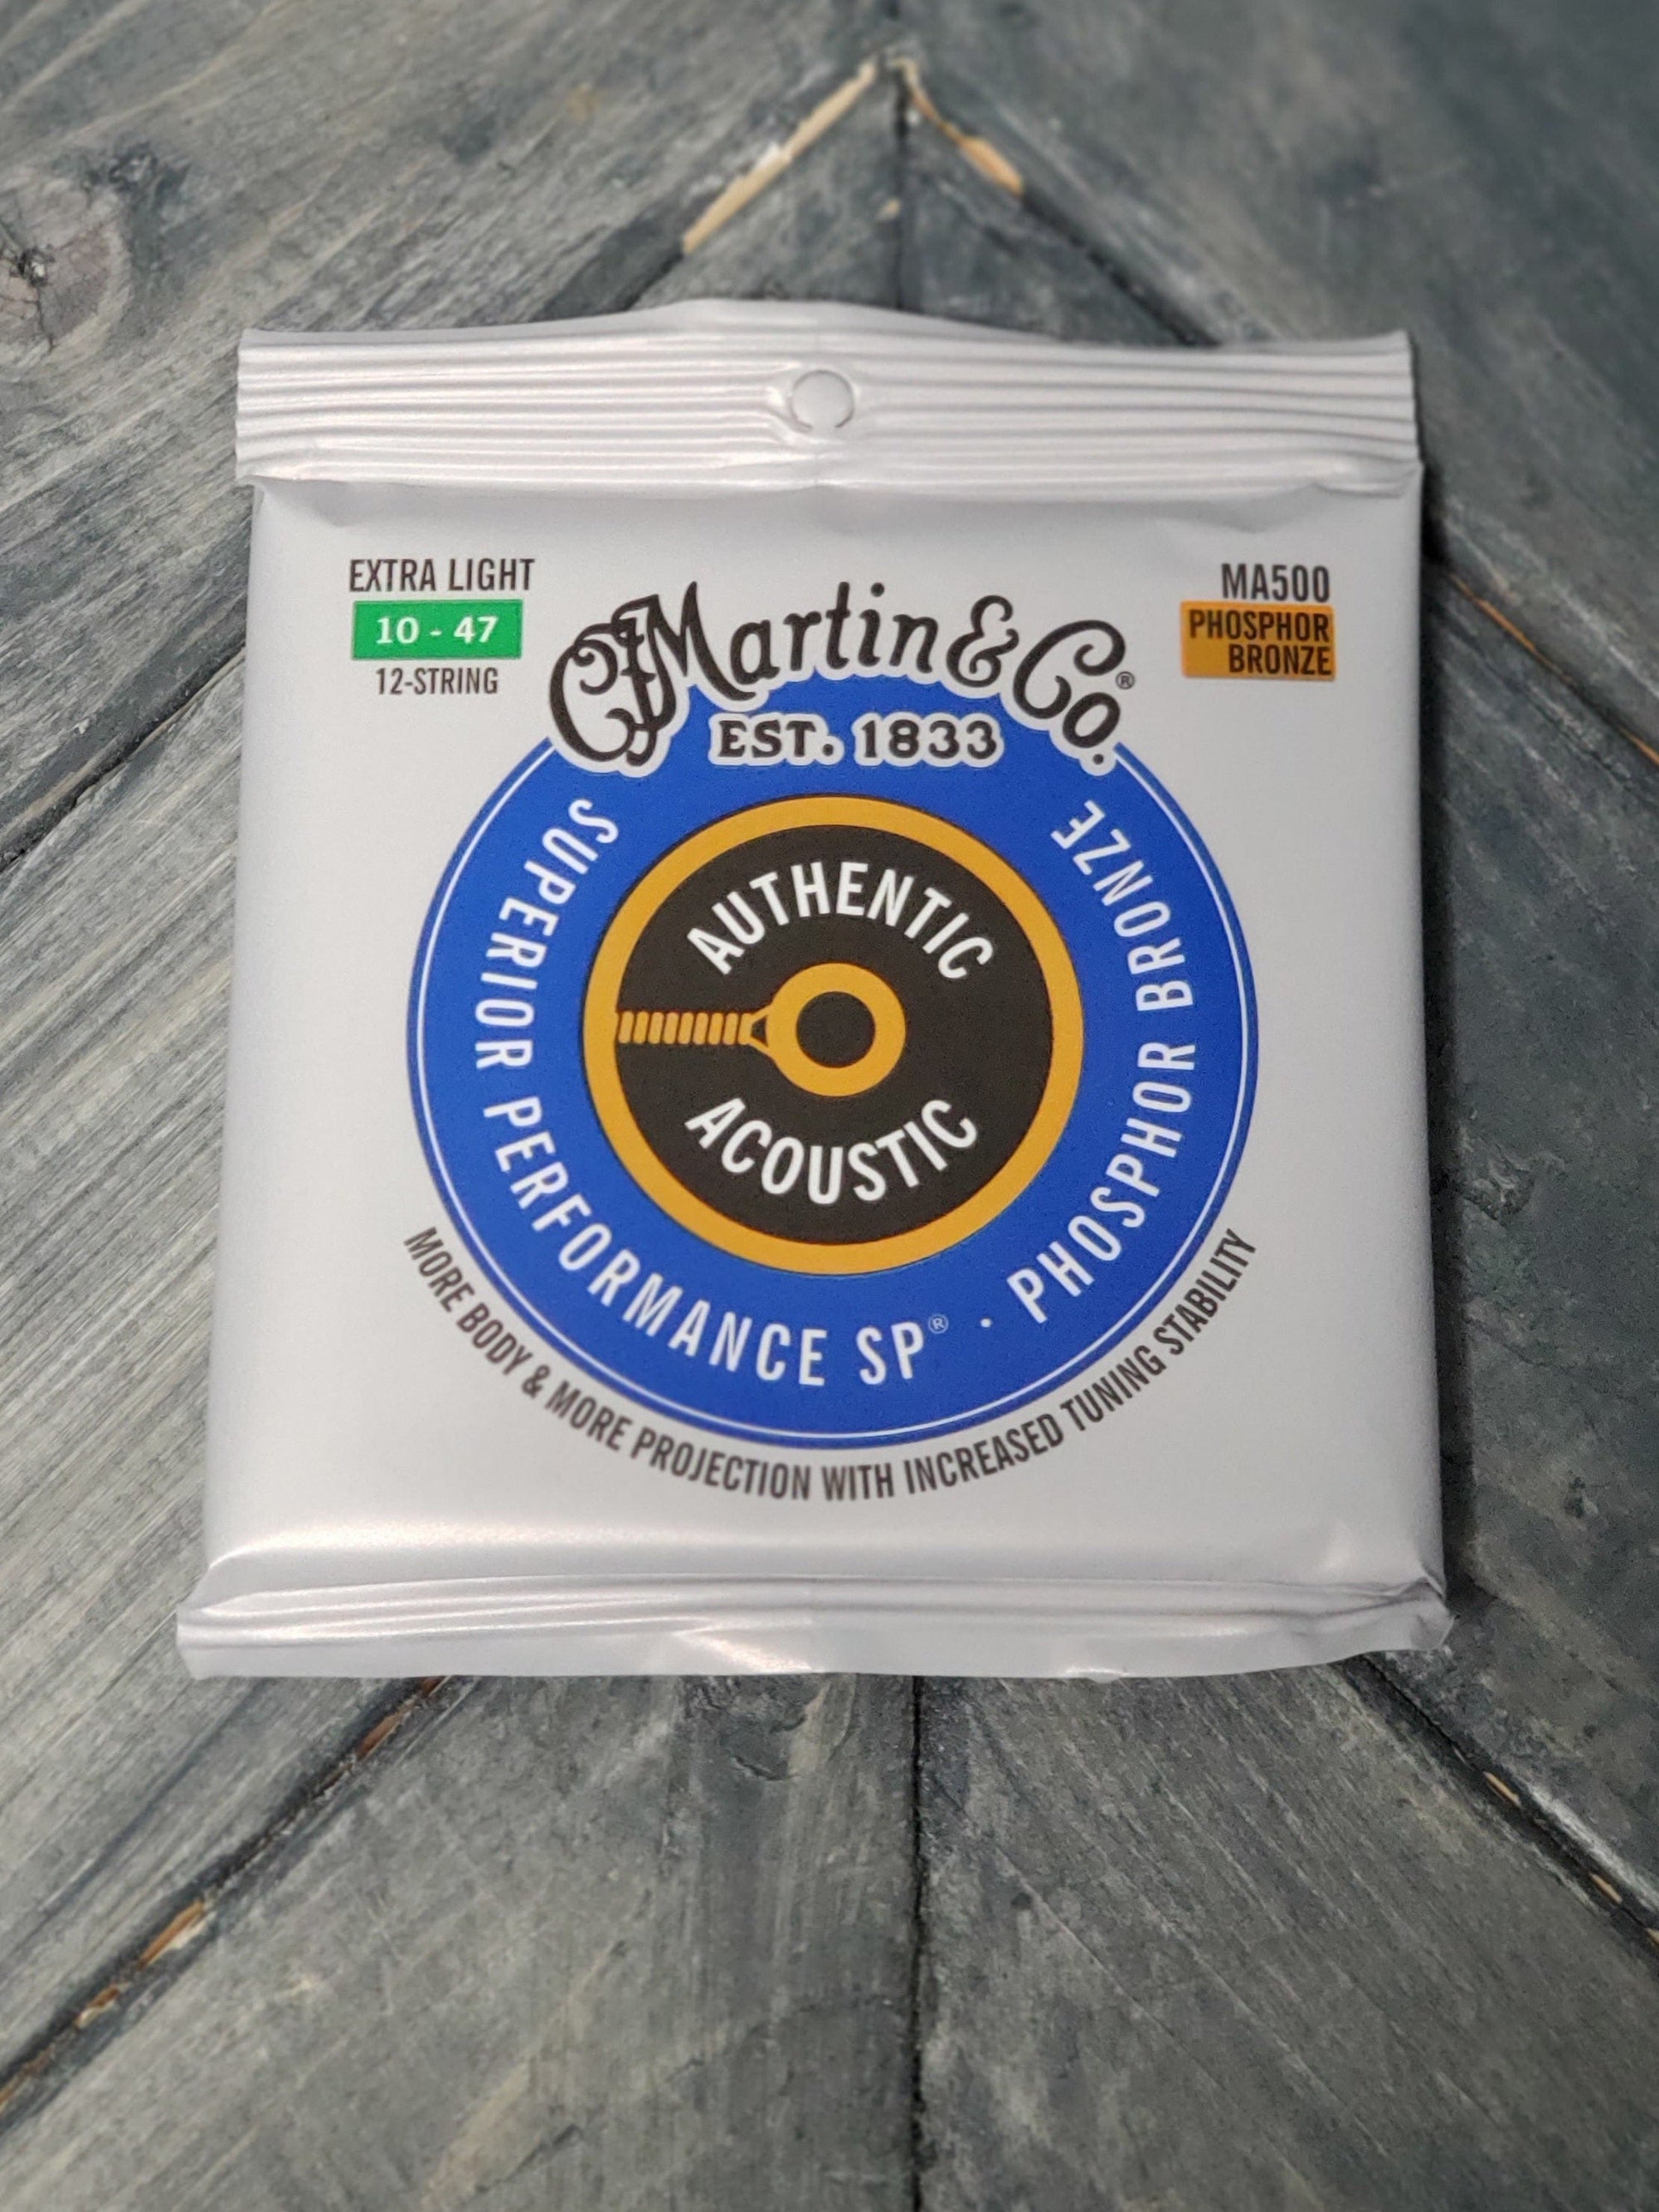 C.F. Martin Guitars Strings Martin MA500 Authentic Acoustic Superior Performance 92/8 Phosphor Bronze Extra Light 12-string Guitar Strings .010-.047